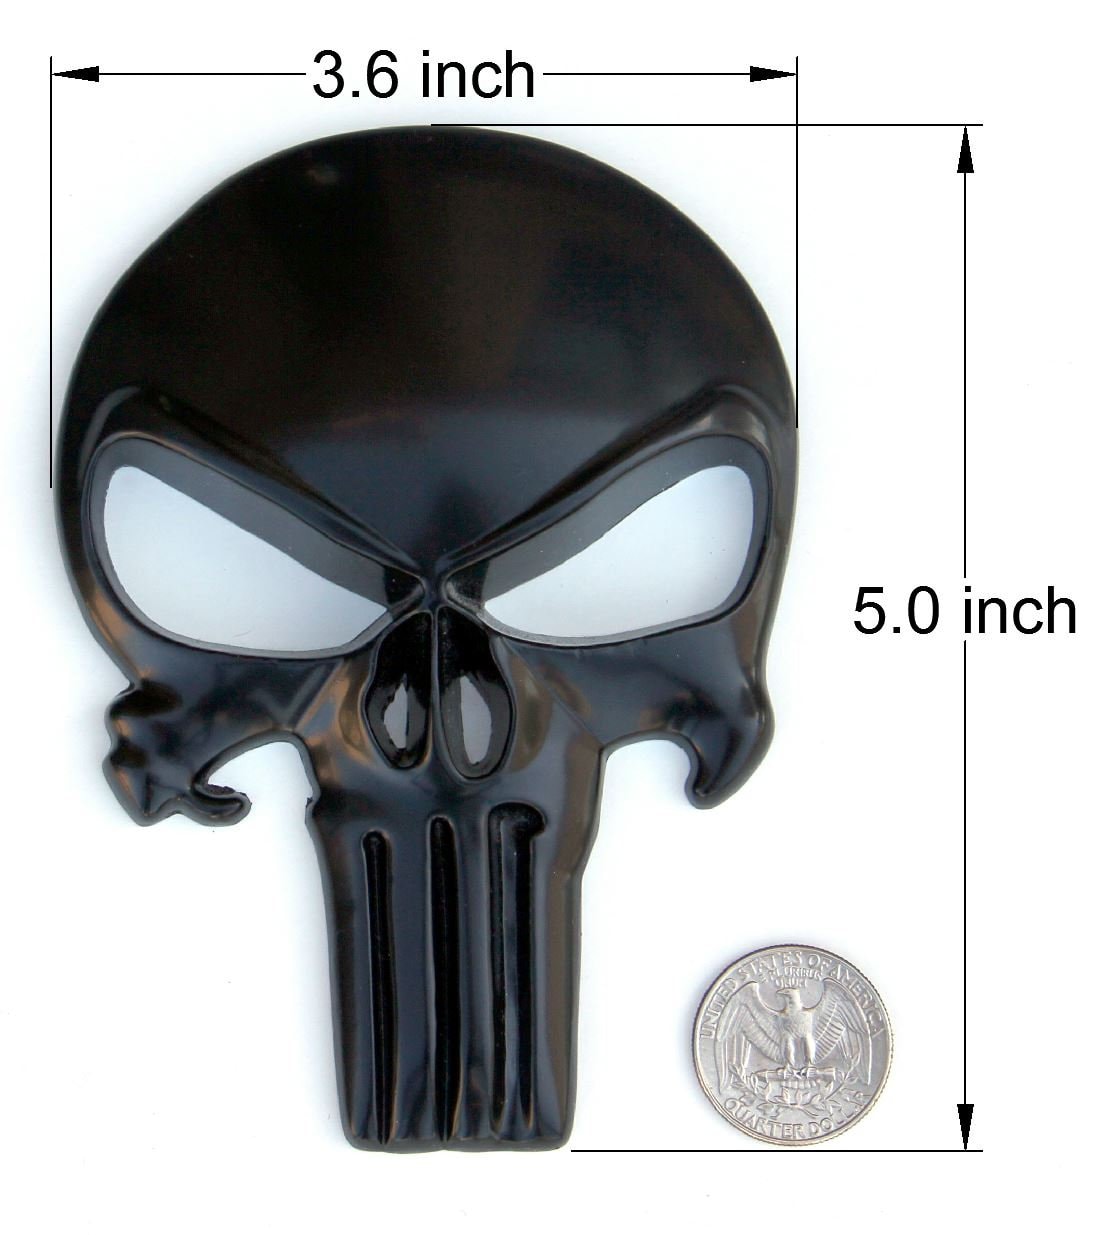 Premium 3D Metal Decal / Sticker Punisher Skull for Car, Truck and